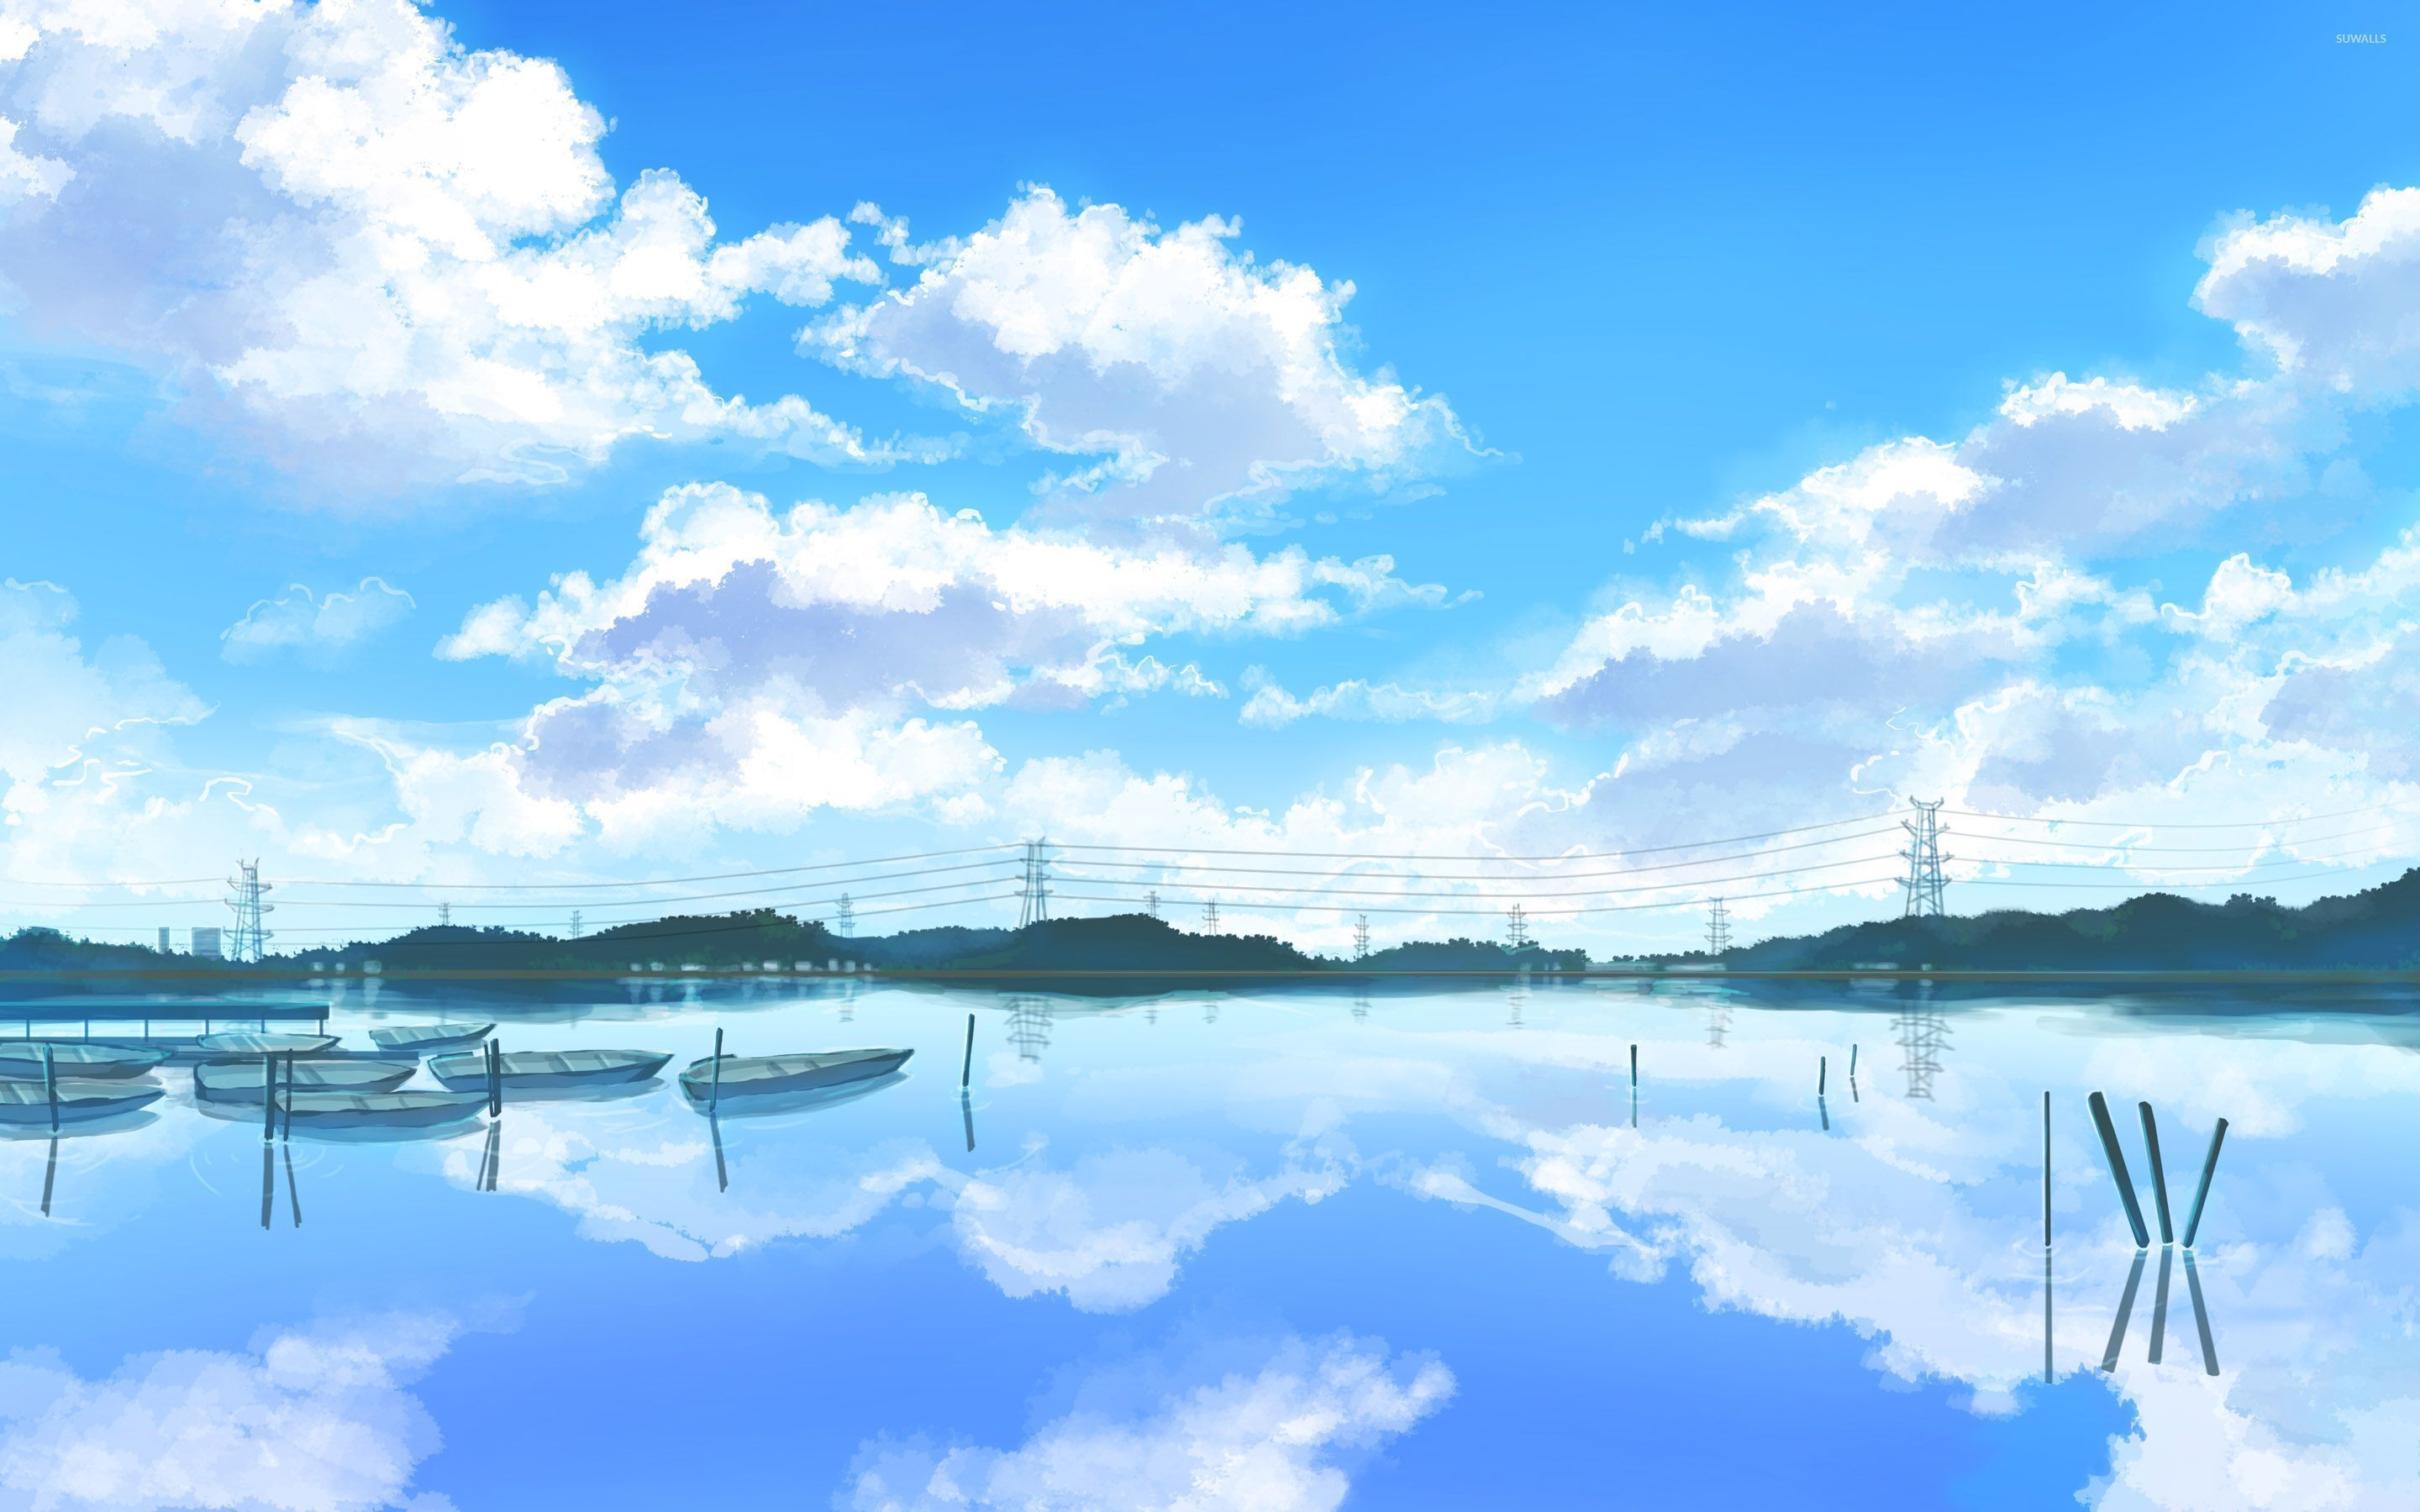 Anime scenery wallpaper of a calm lake with boats and power lines - Lake